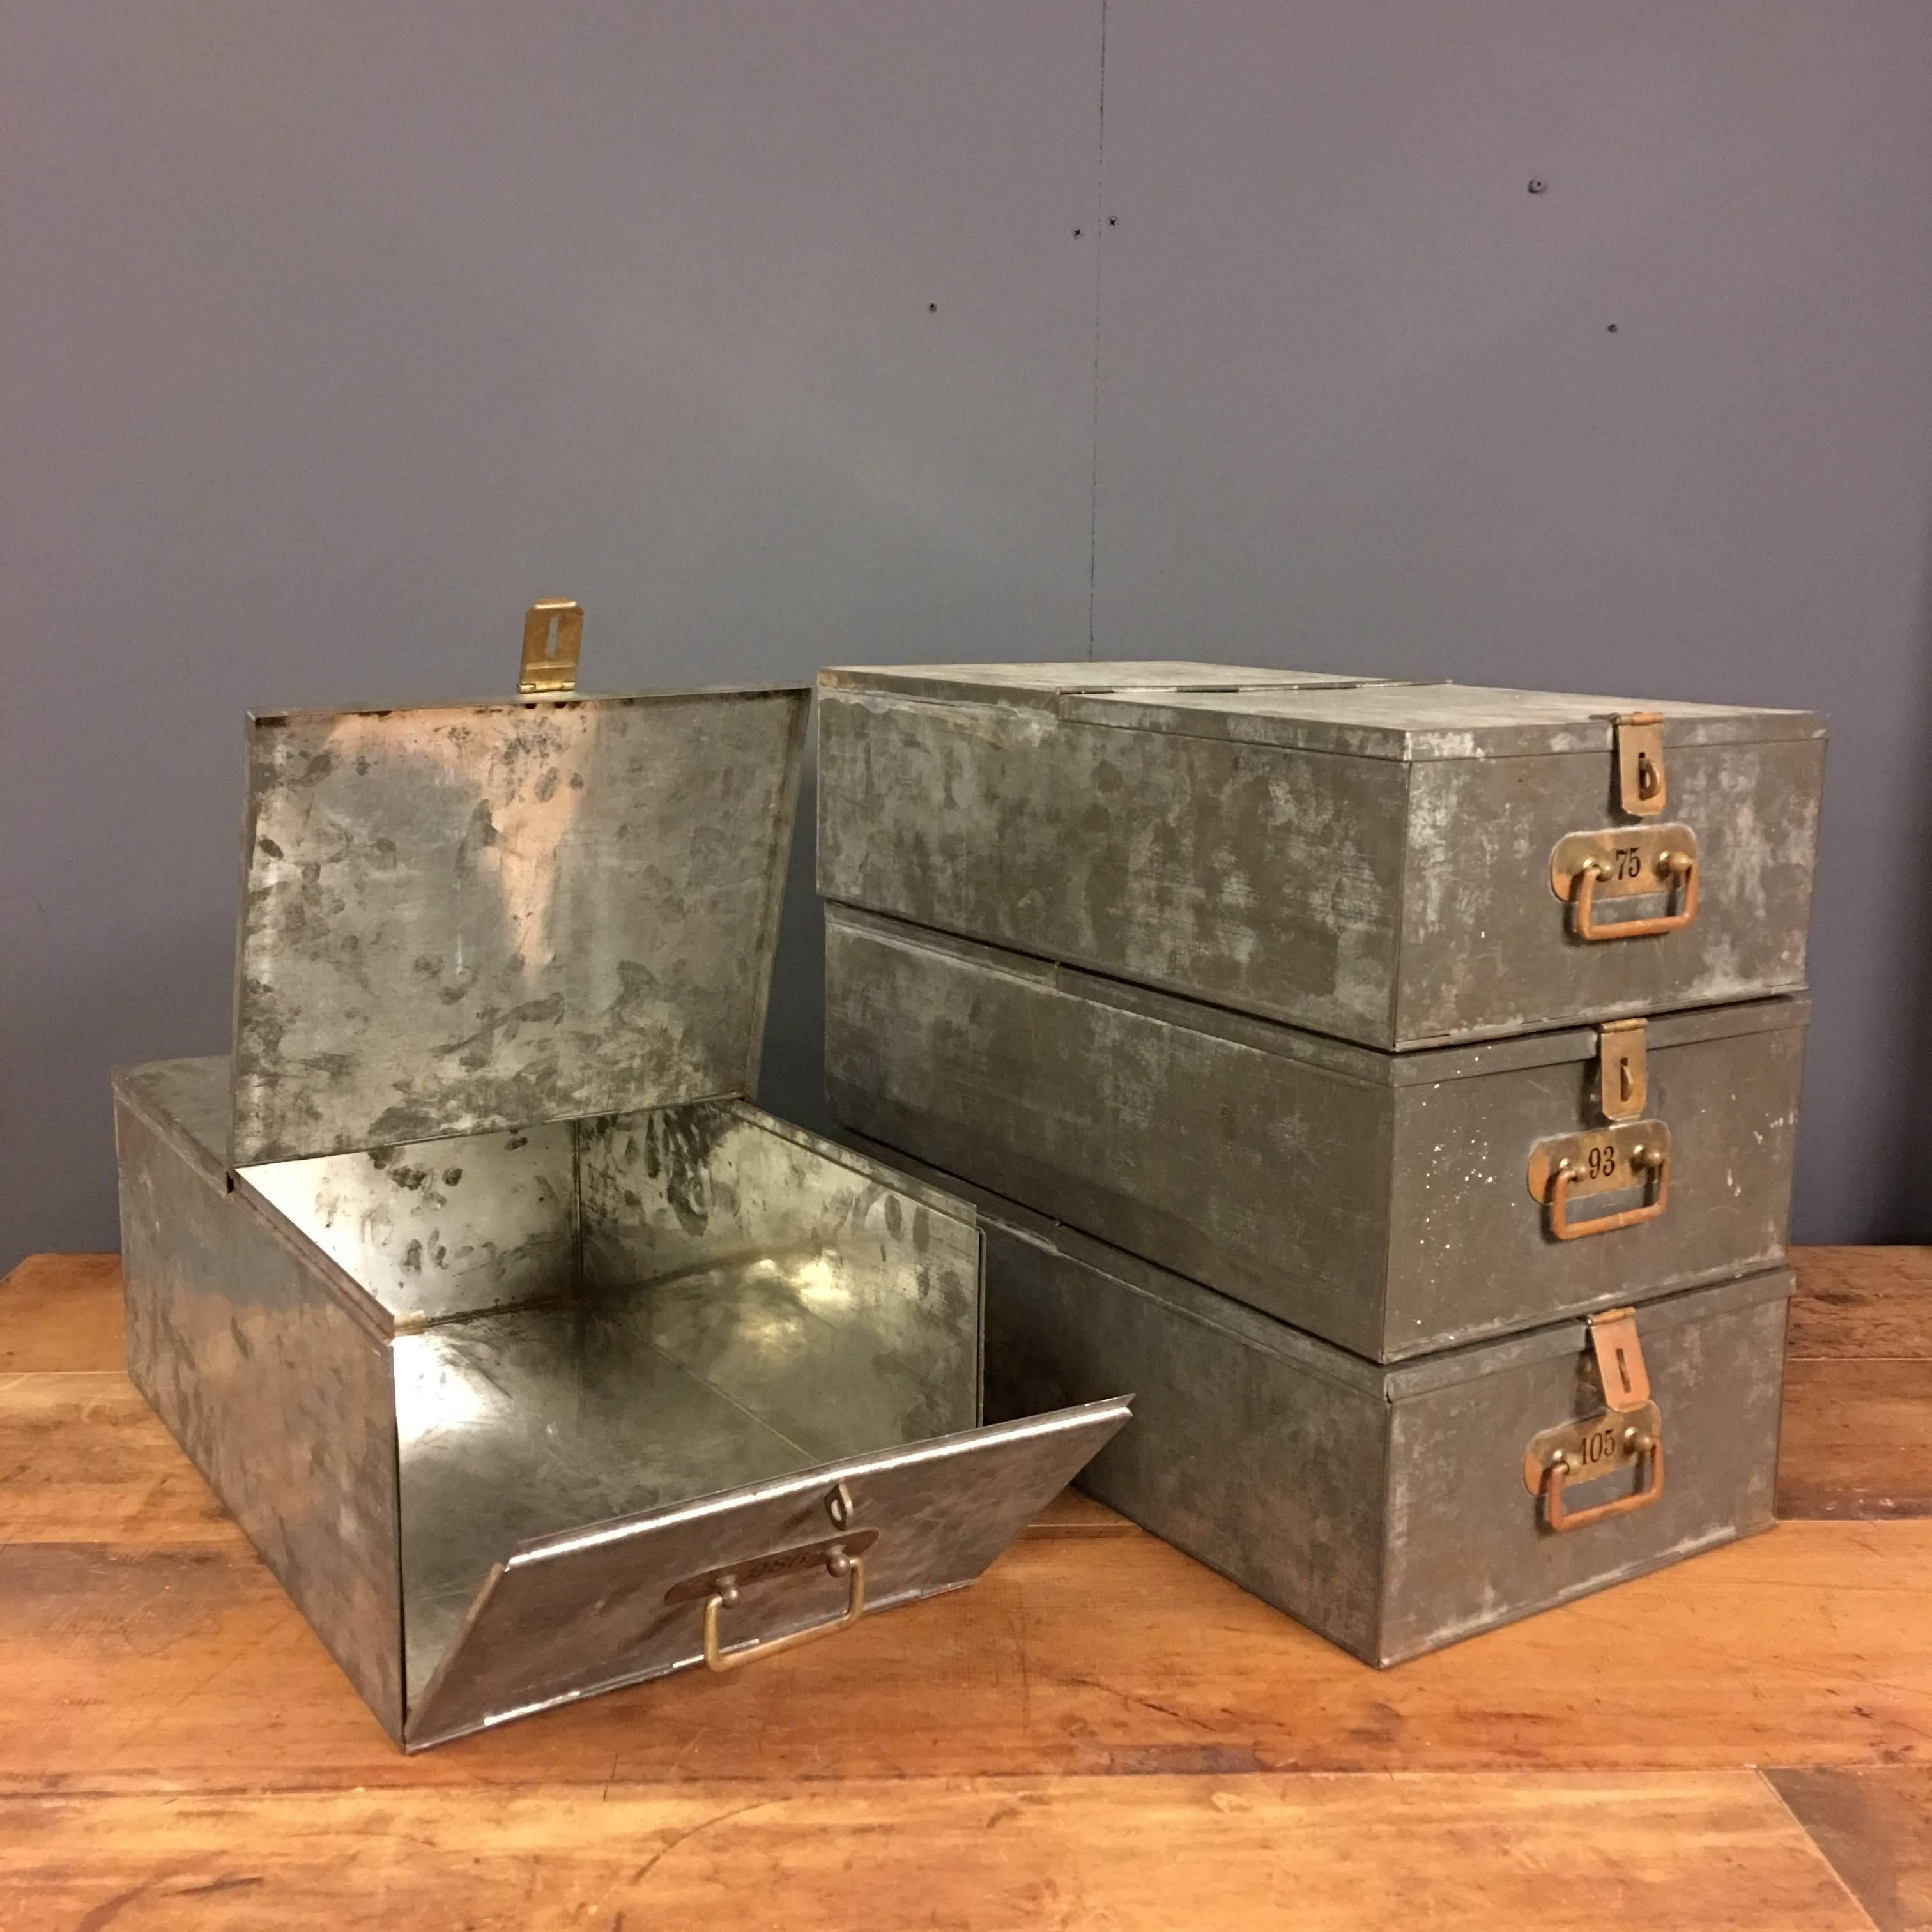 Antique bank box. Manufactured by the famous Parisian Locksmith “Fichet” for the Swiss Federal bank in 1912. Beautiful numbered brass handles. Stunning display in any house or office. The have two hinges, top and front. Unique piece of Swiss banking